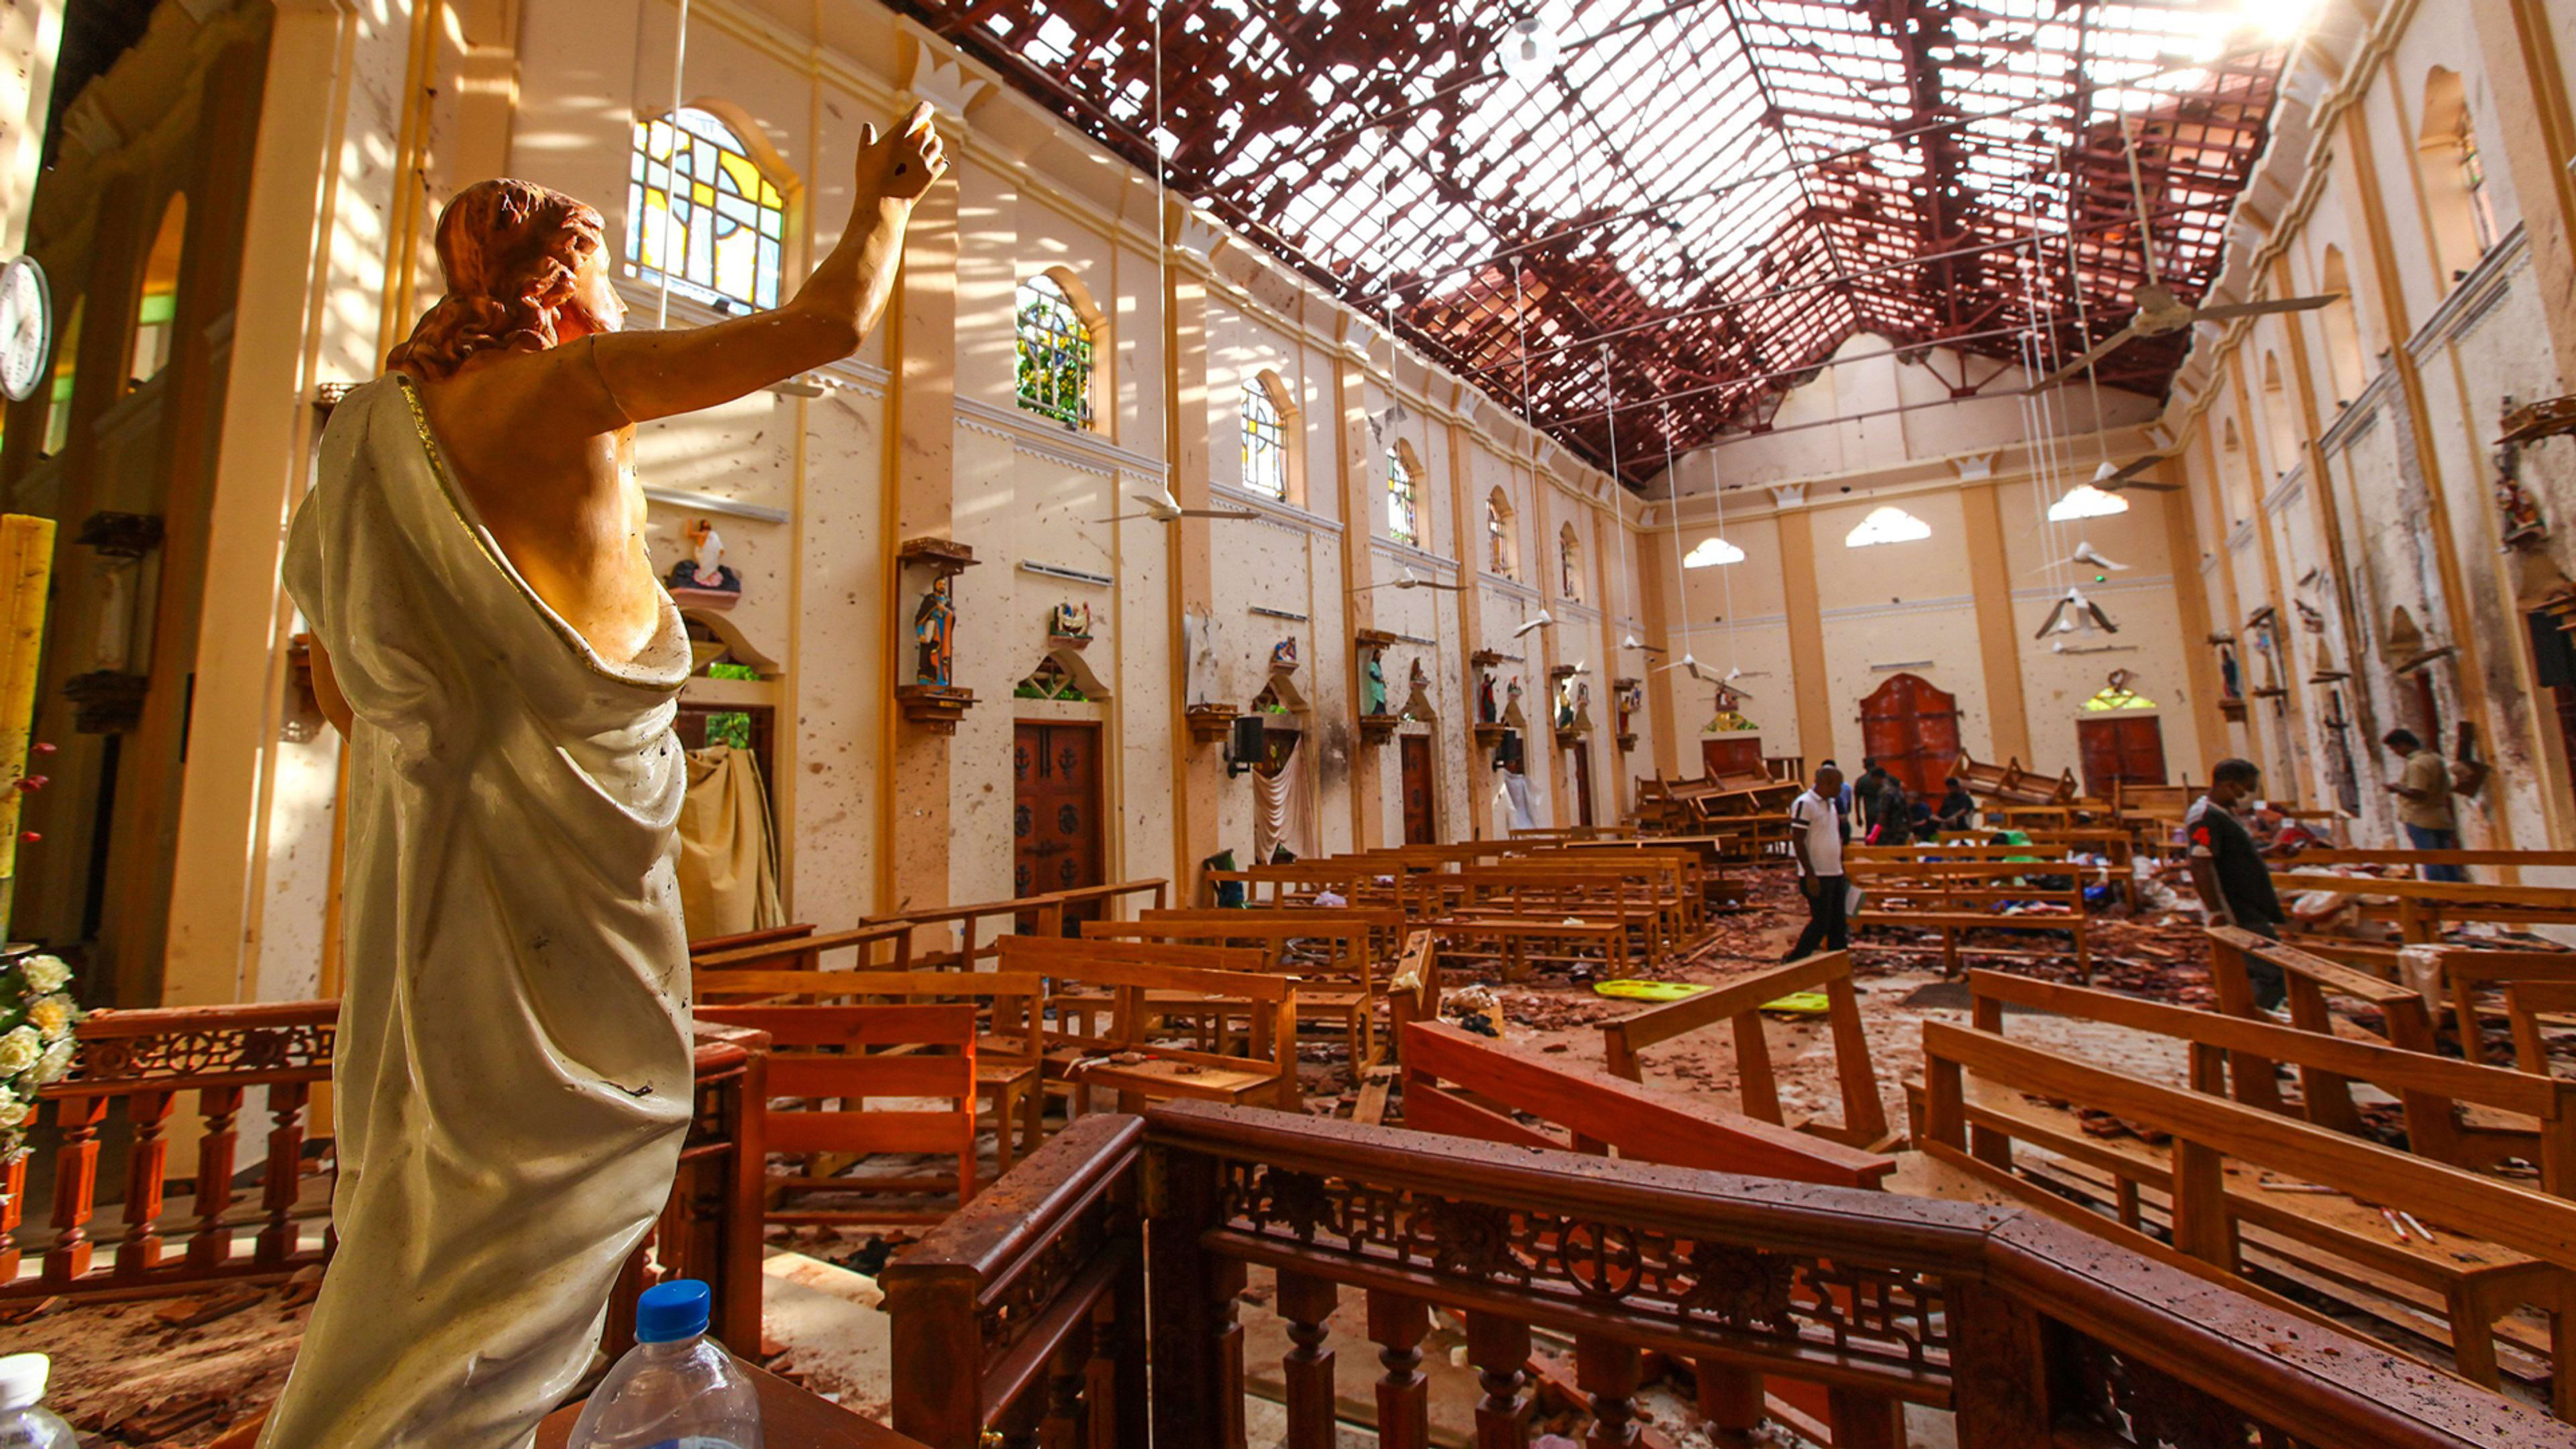 How to help Sri Lanka bombing victims: 3 things you can do right now